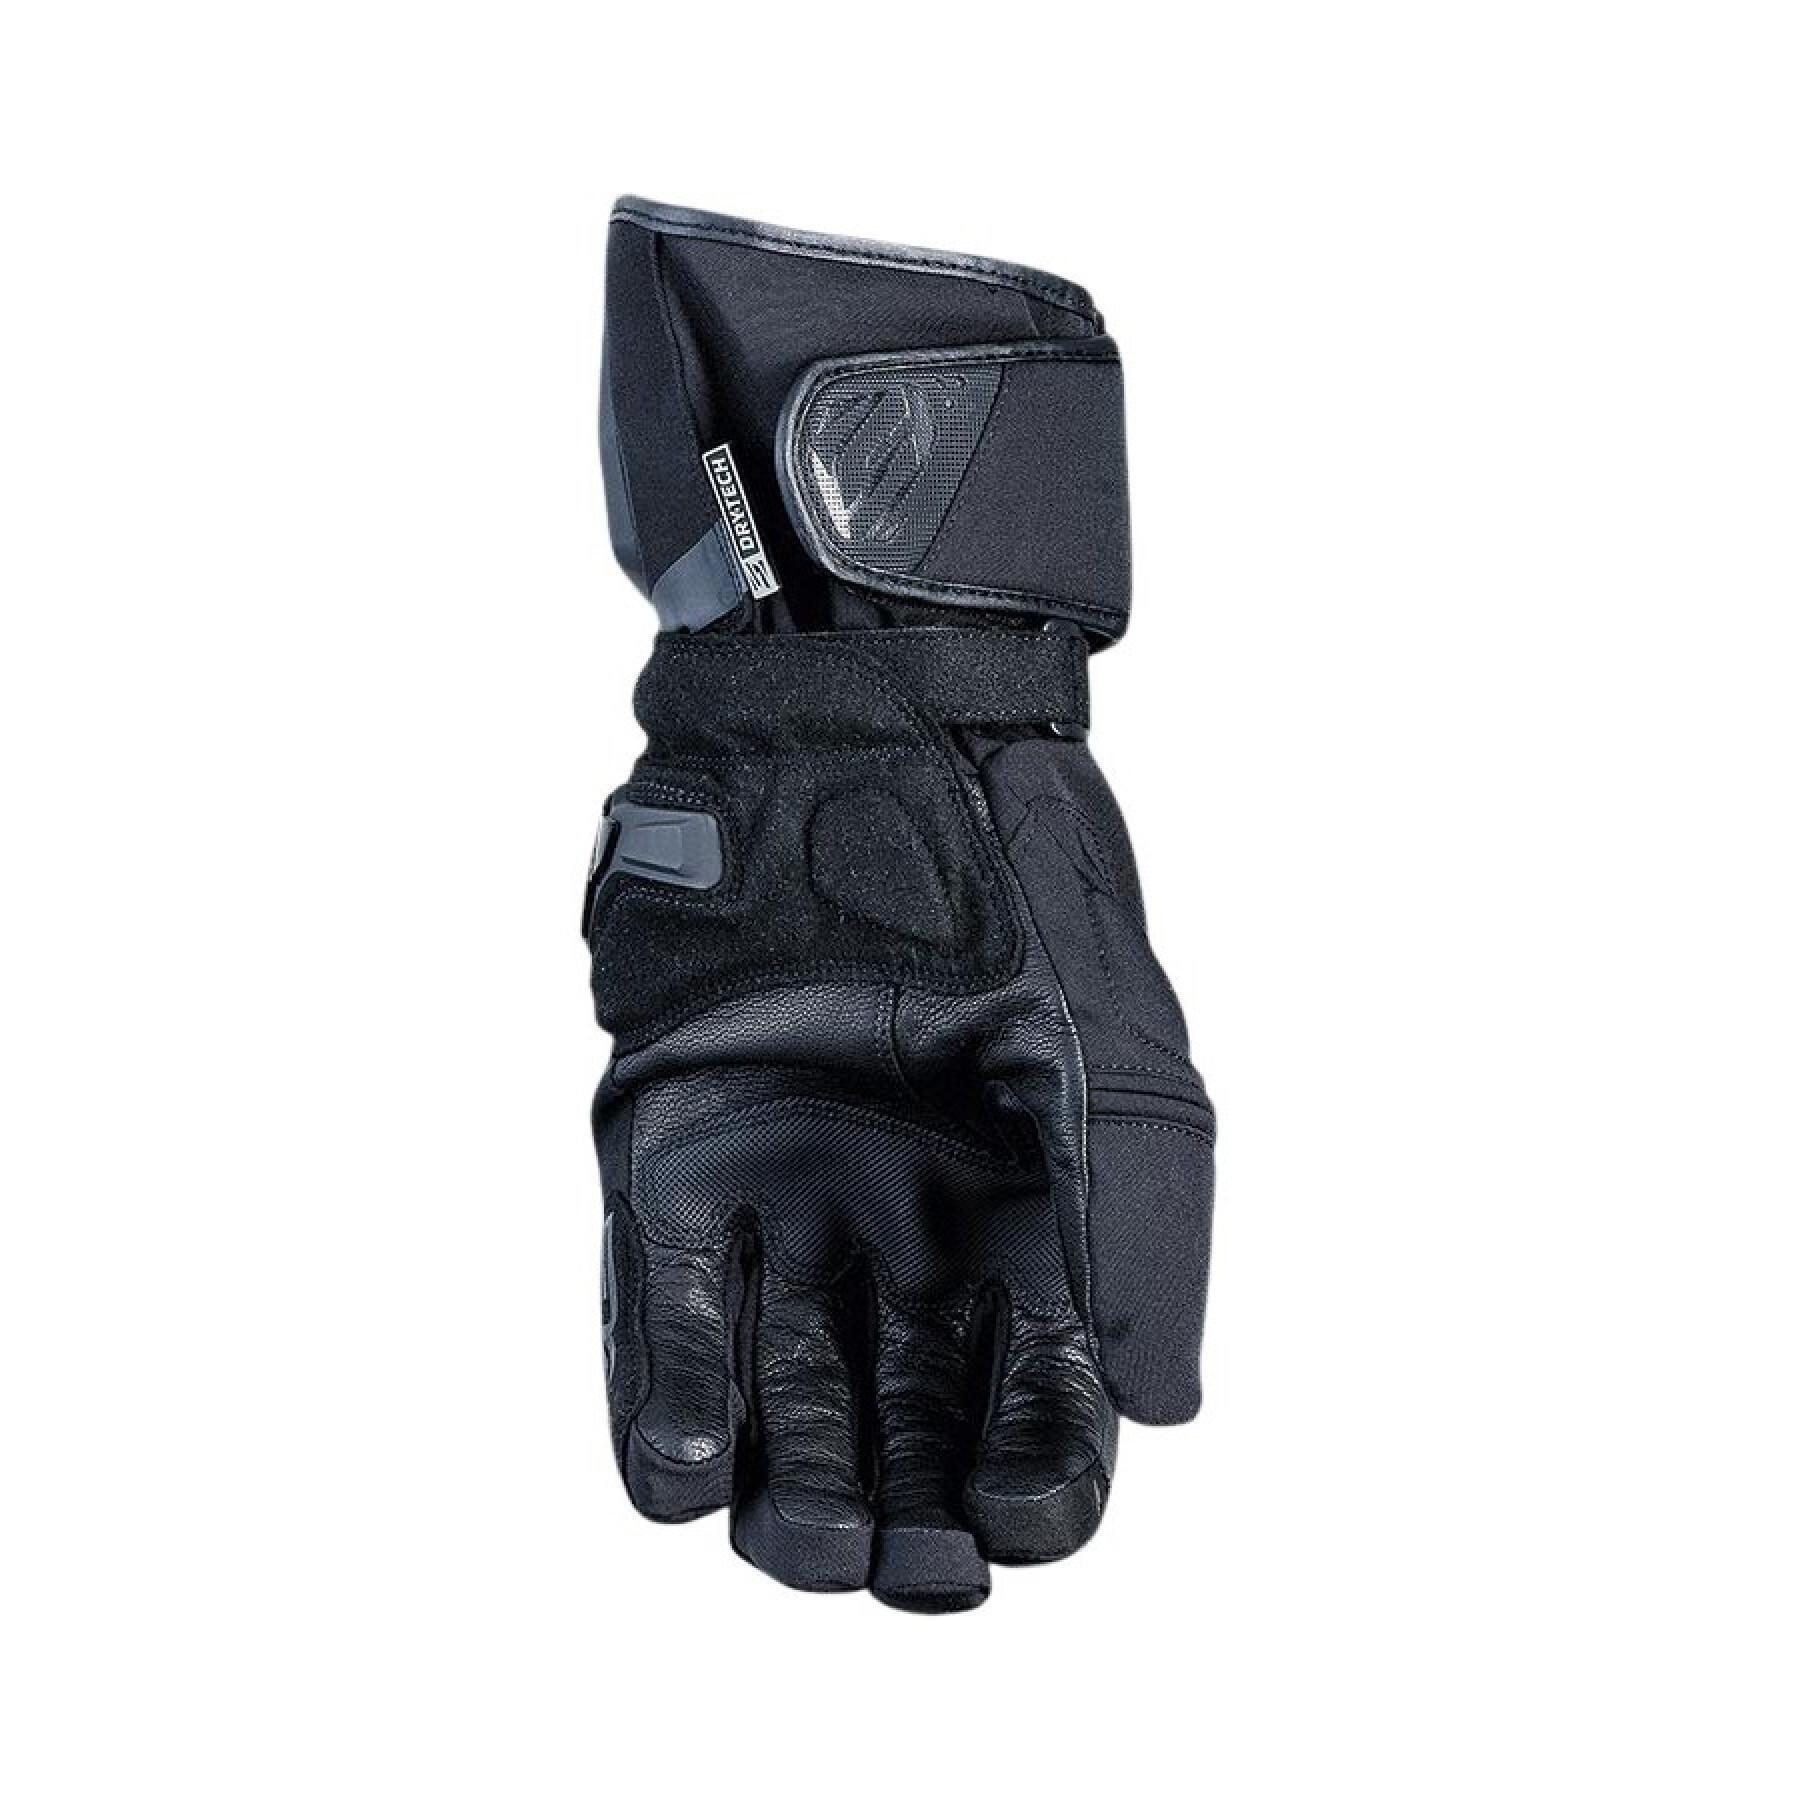 Winter motorcycle gloves Five SPORT.WP